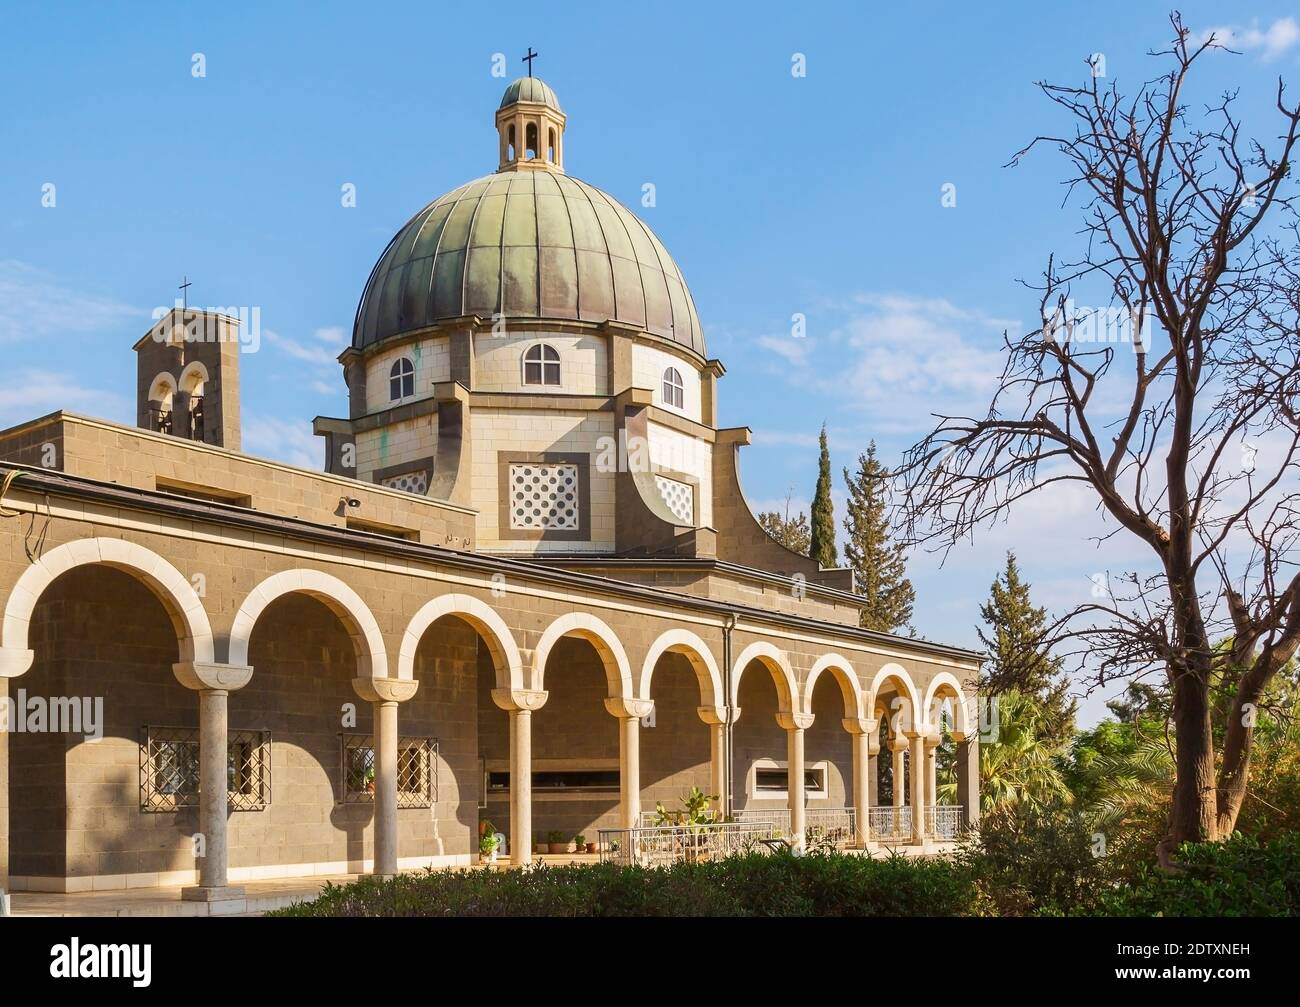 The Church of the Beatitudes on the Mount of Beatitudes, Sea of Galilee region, Israel Stock Photo